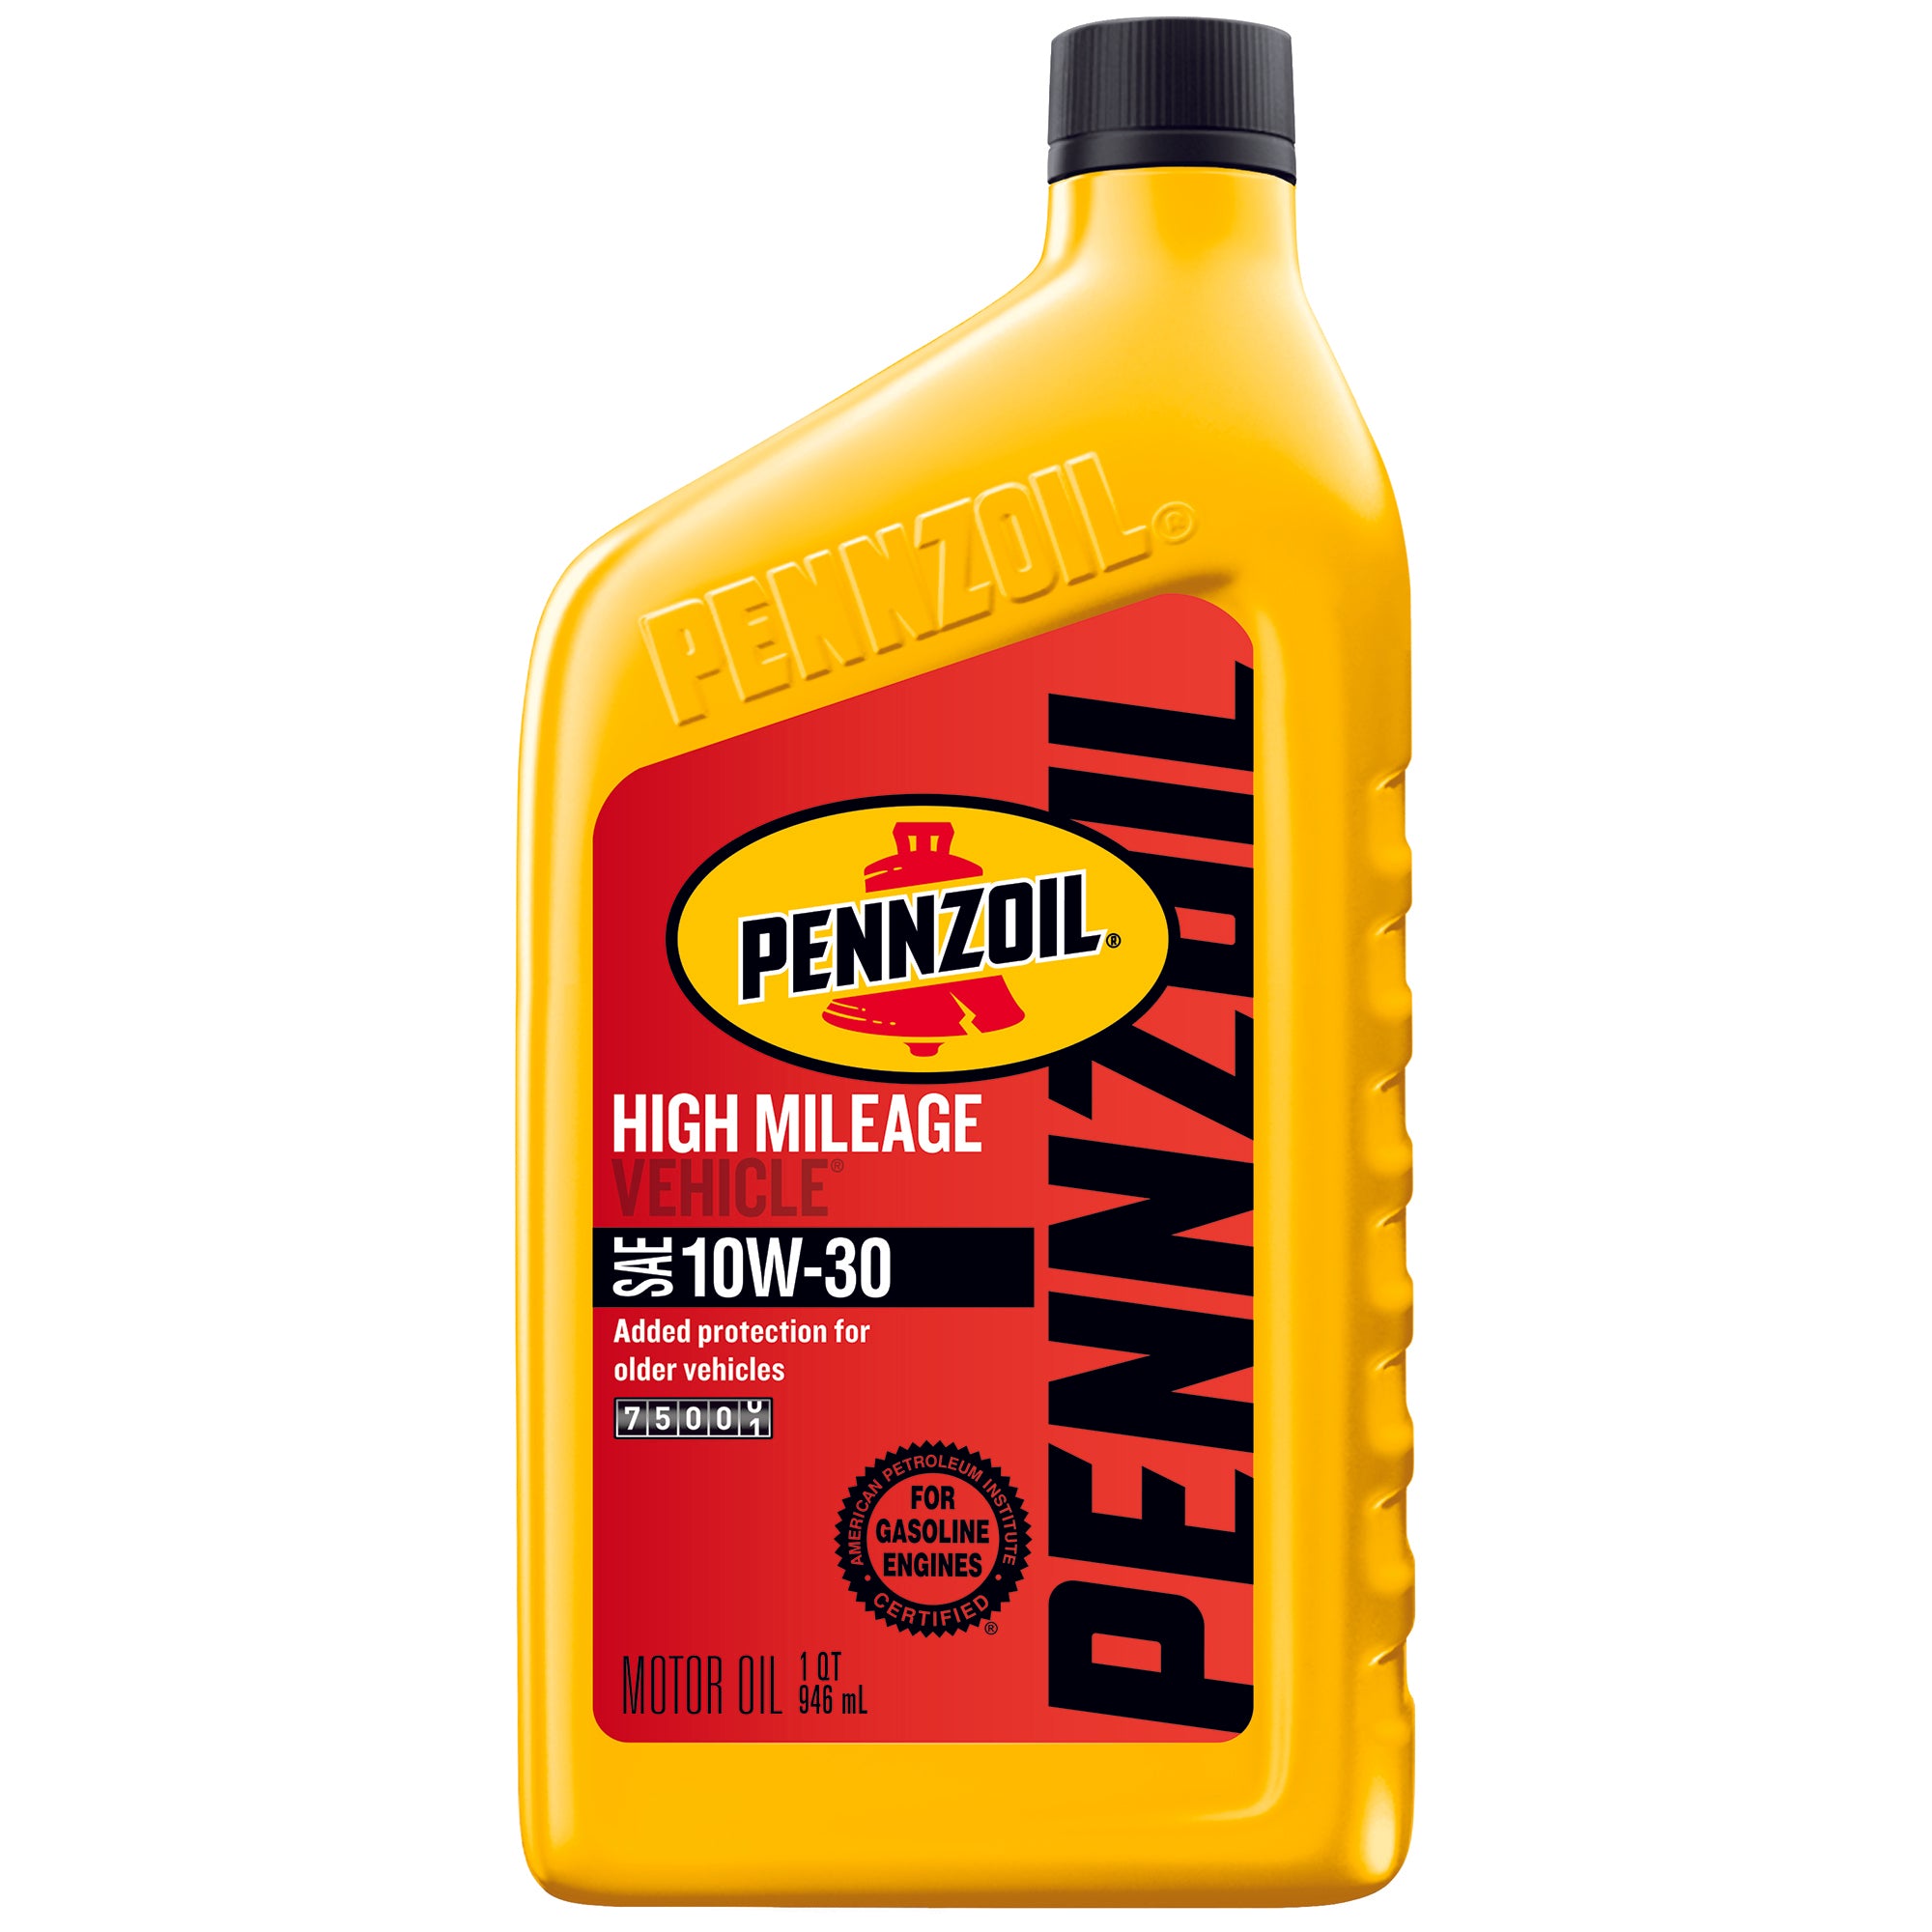 Pennzoil High Mileage Vehicle SAE 10W 30 Motor Oil Case of 6 1 qt